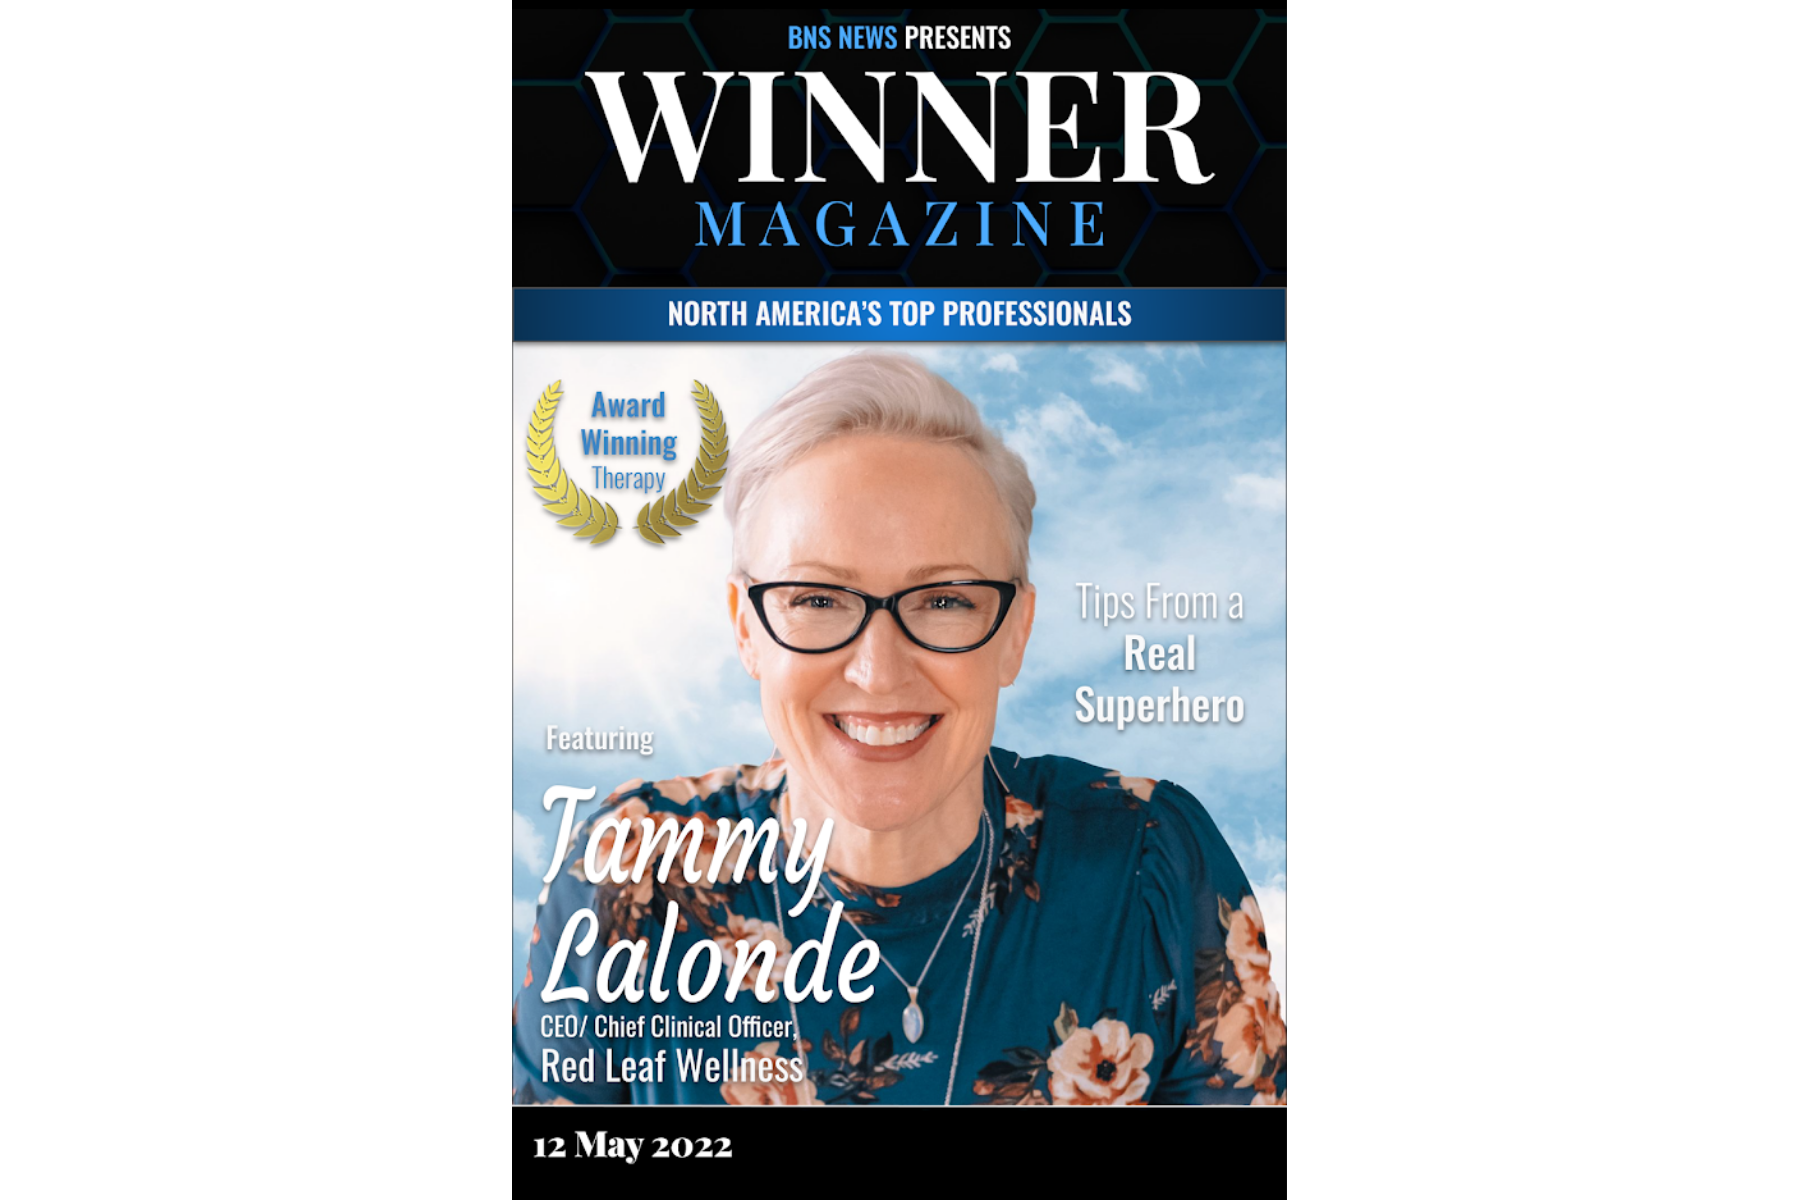 Exclusive Interview with Tammy Lalonde, CEO of Red Leaf Wellness, for Winner Magazine| BNS News